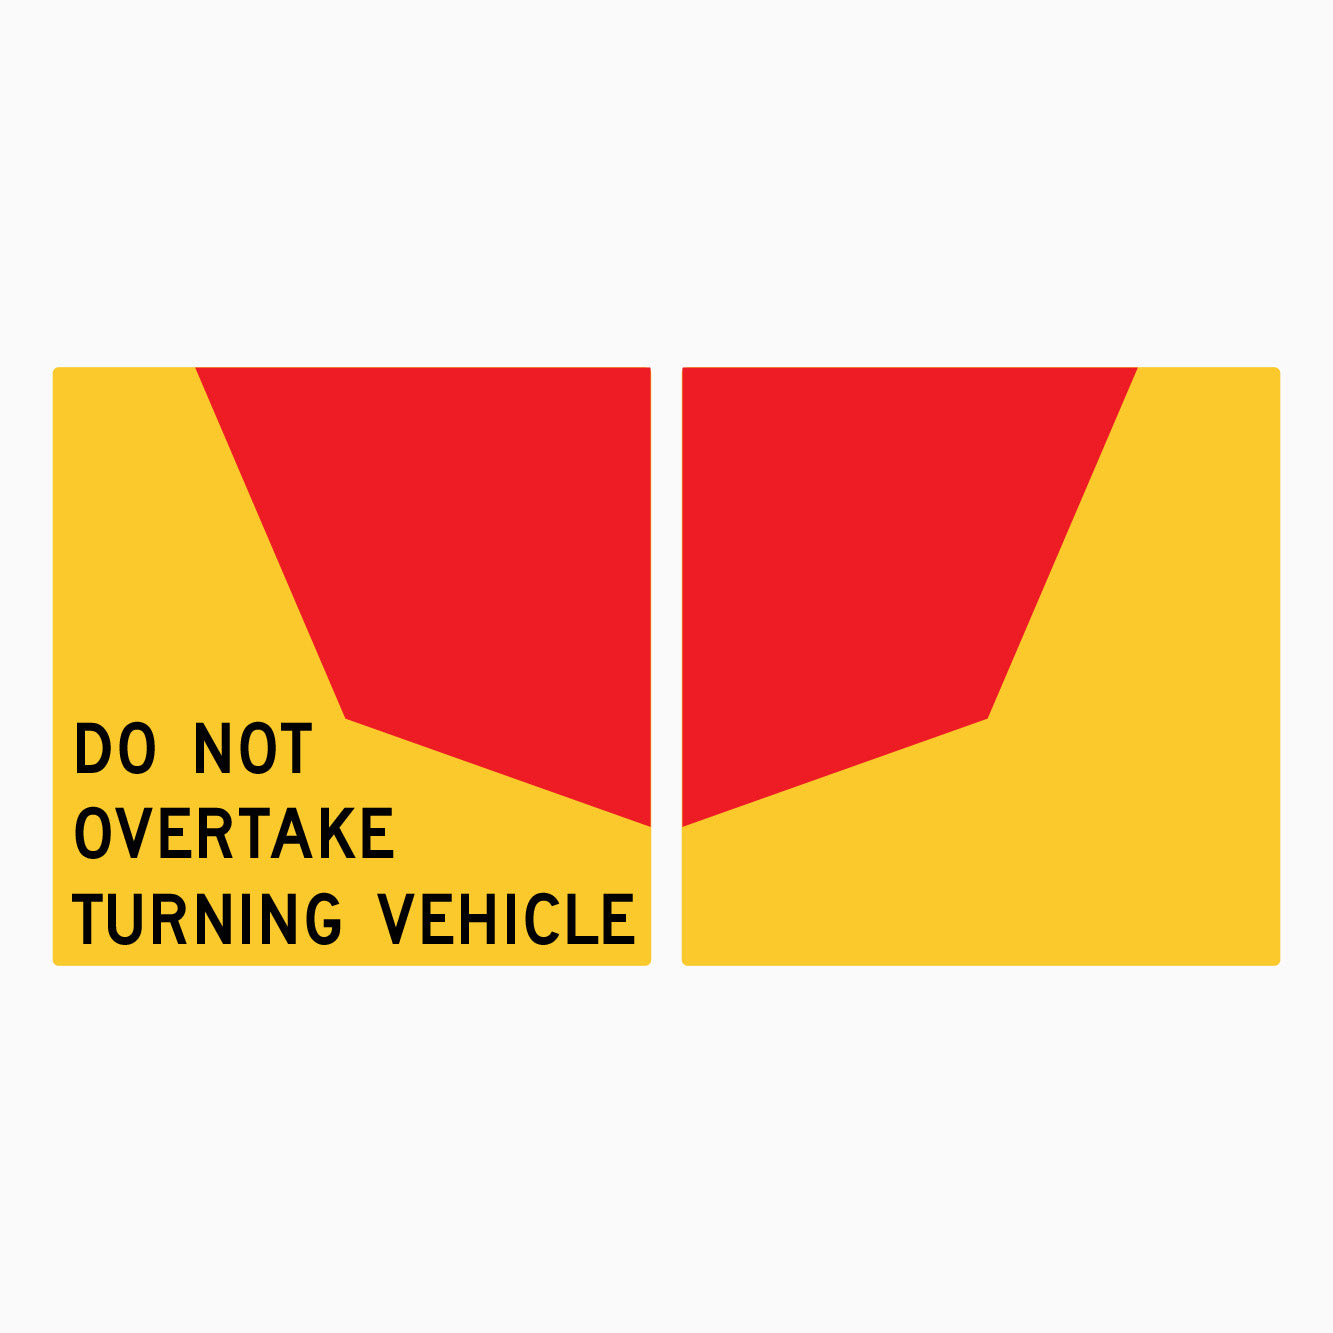 ﻿DO NOT OVERTAKE TURNING VEHICLE SIGN - GET SIGNS